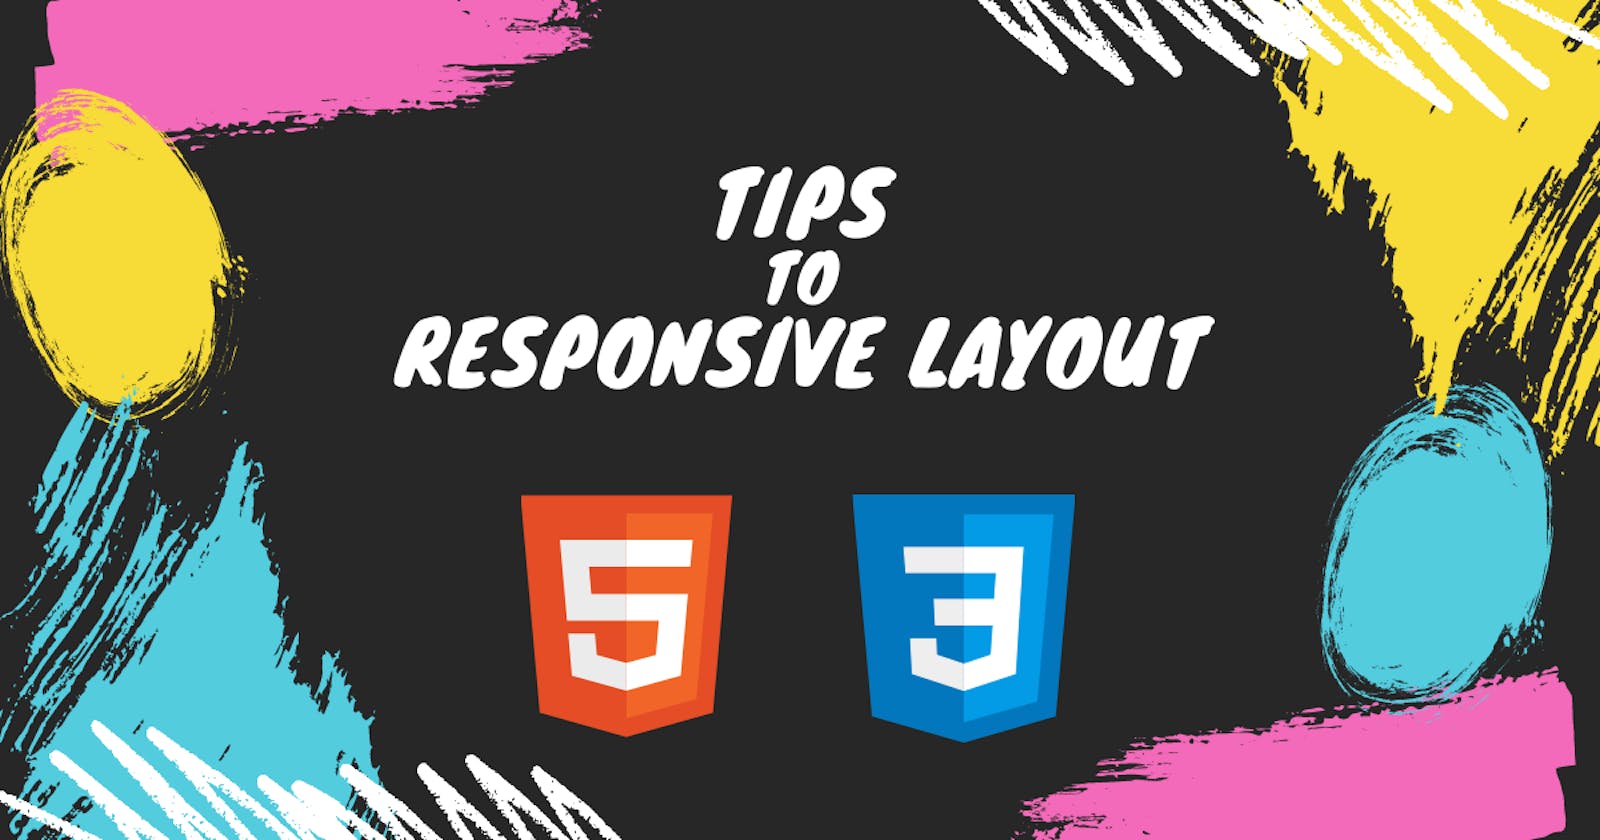 Tips for making a Responsive Layout